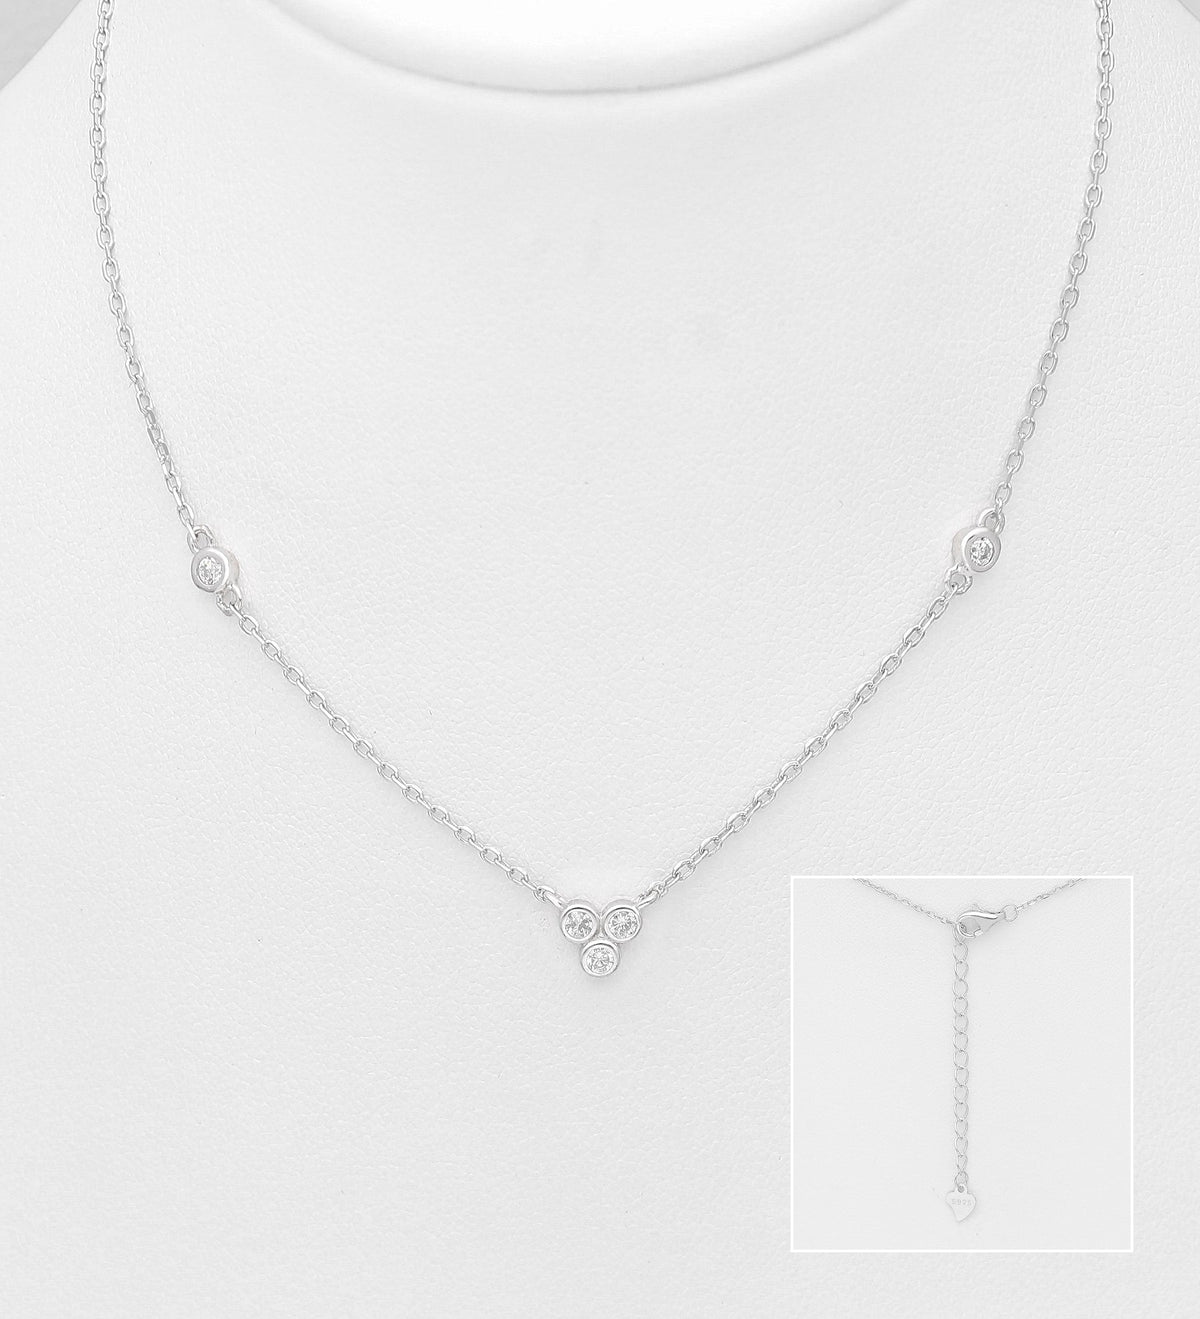 sterling silver simple necklace with CZ, necklace for gift, cute necklace, popular necklace, elegant necklace, work necklace. everyday necklace, every day necklace with CZ, sterling silver necklace with cz sterling silver necklace with 3 diamonds, sterling silver necklace with 5 diamonds by Kesleyboutique.com, girlwith3jobs, Johana billion, Shopping in Miami, Shopping in south beach, influencer jewelry